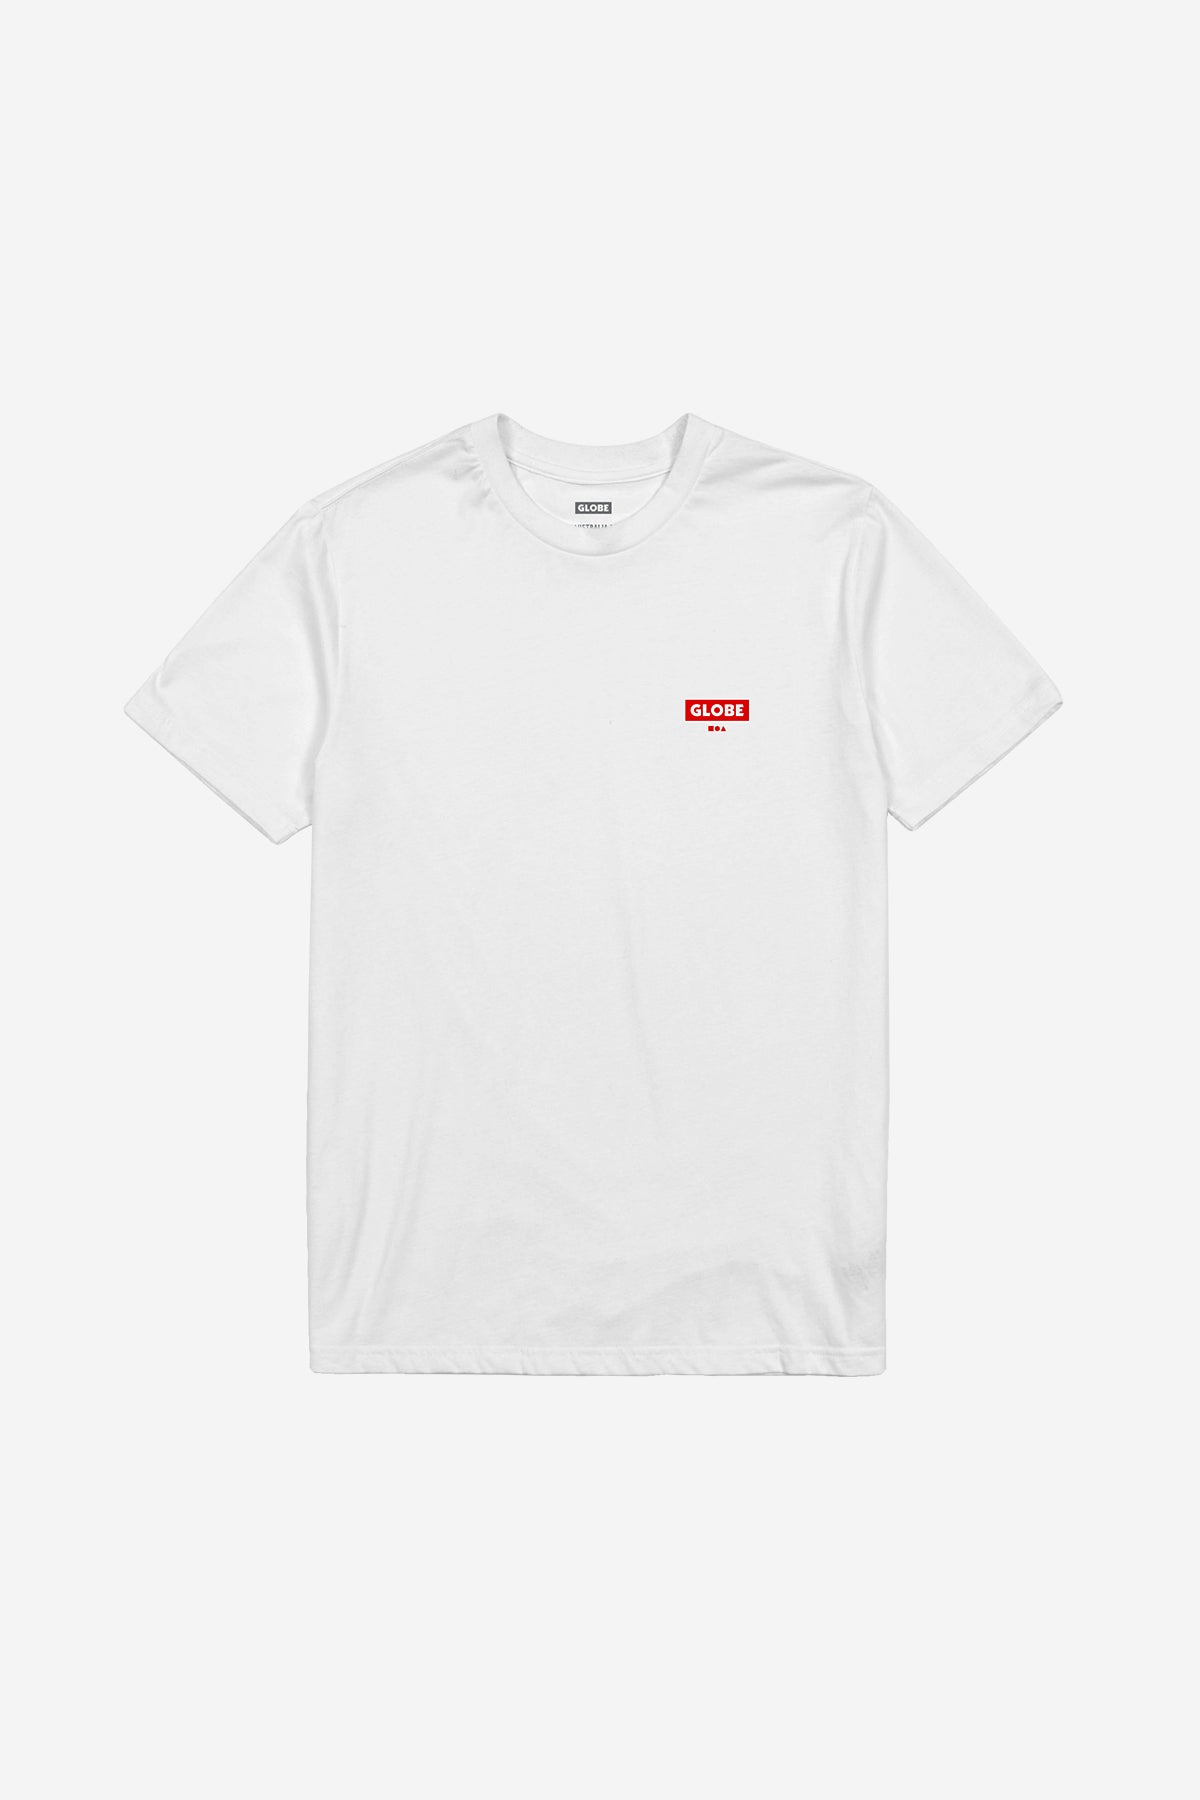 Living Low Velocity Tee - White/Red